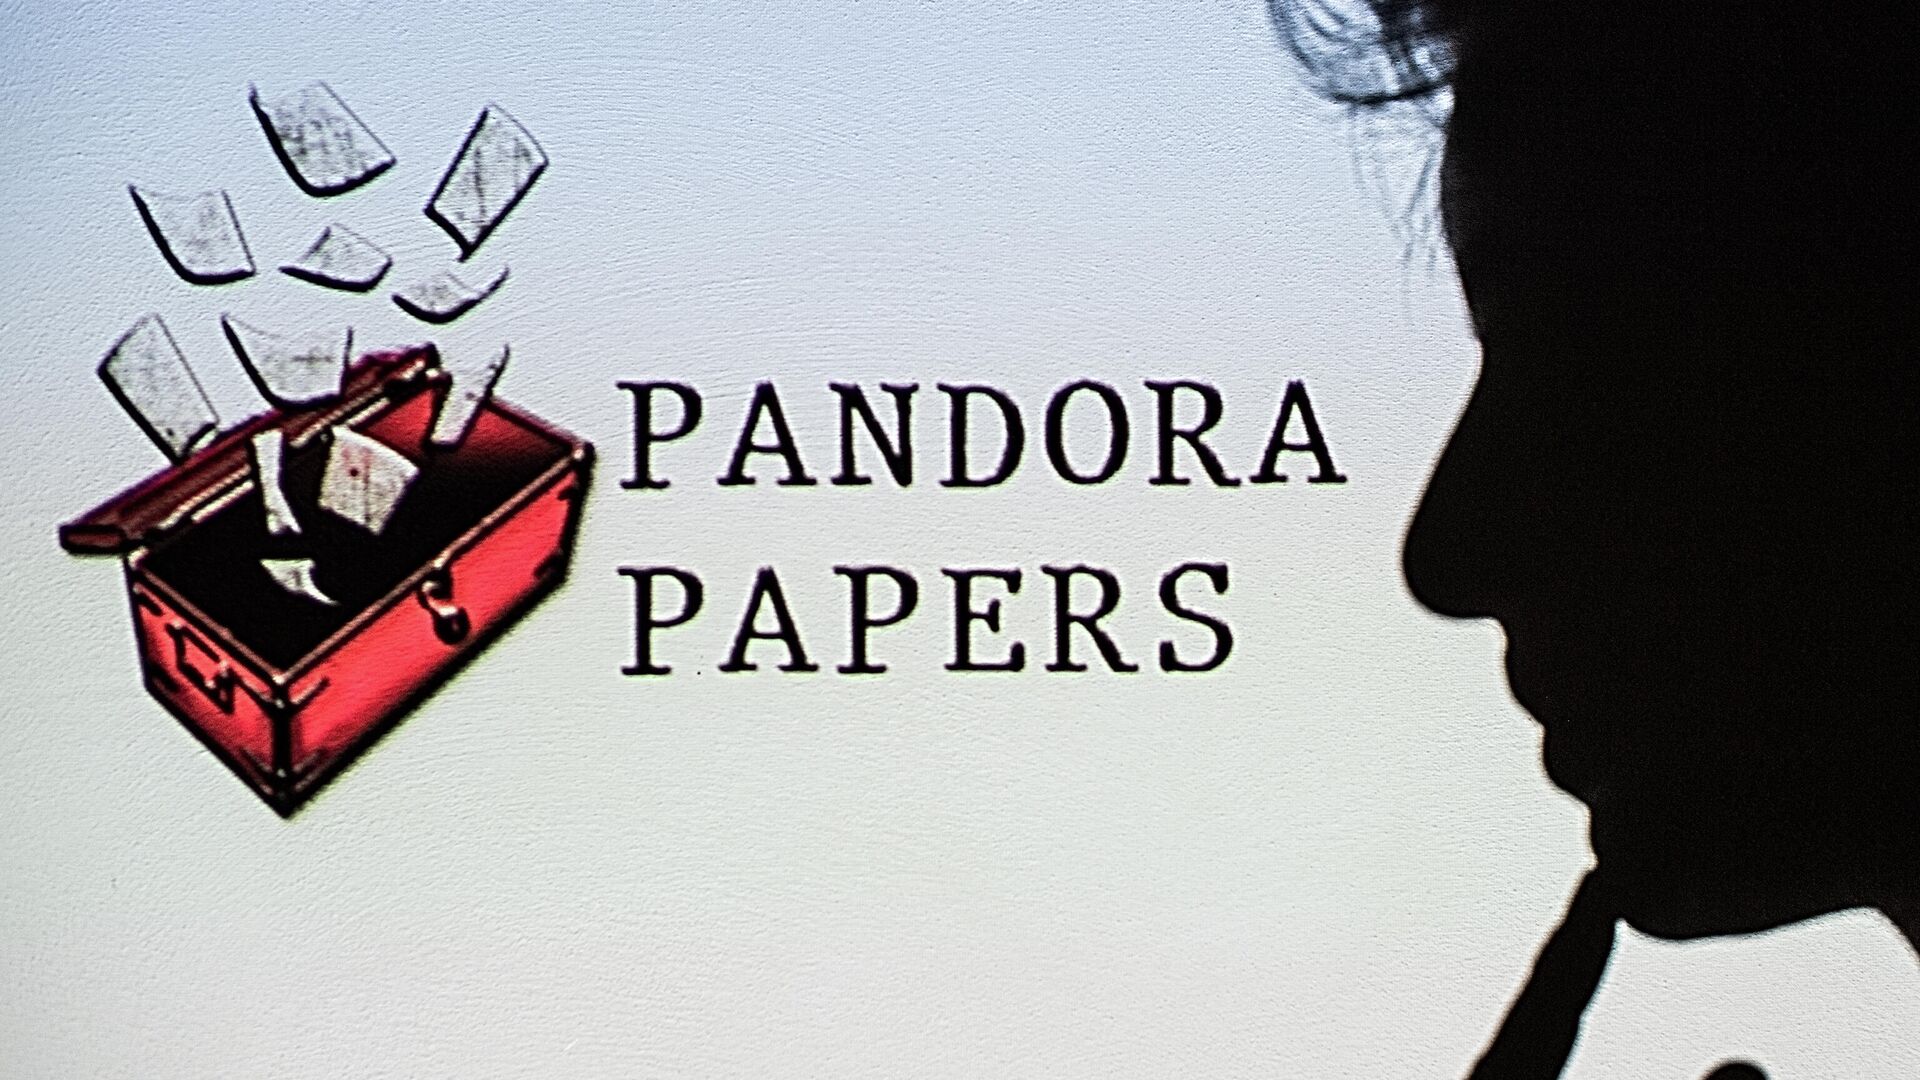 This photograph illustration shows a woman's shadow cast on the logo of Pandora Papers, in Lavau-sur-Loire, western France, on October 4, 2021 - Sputnik International, 1920, 06.10.2021